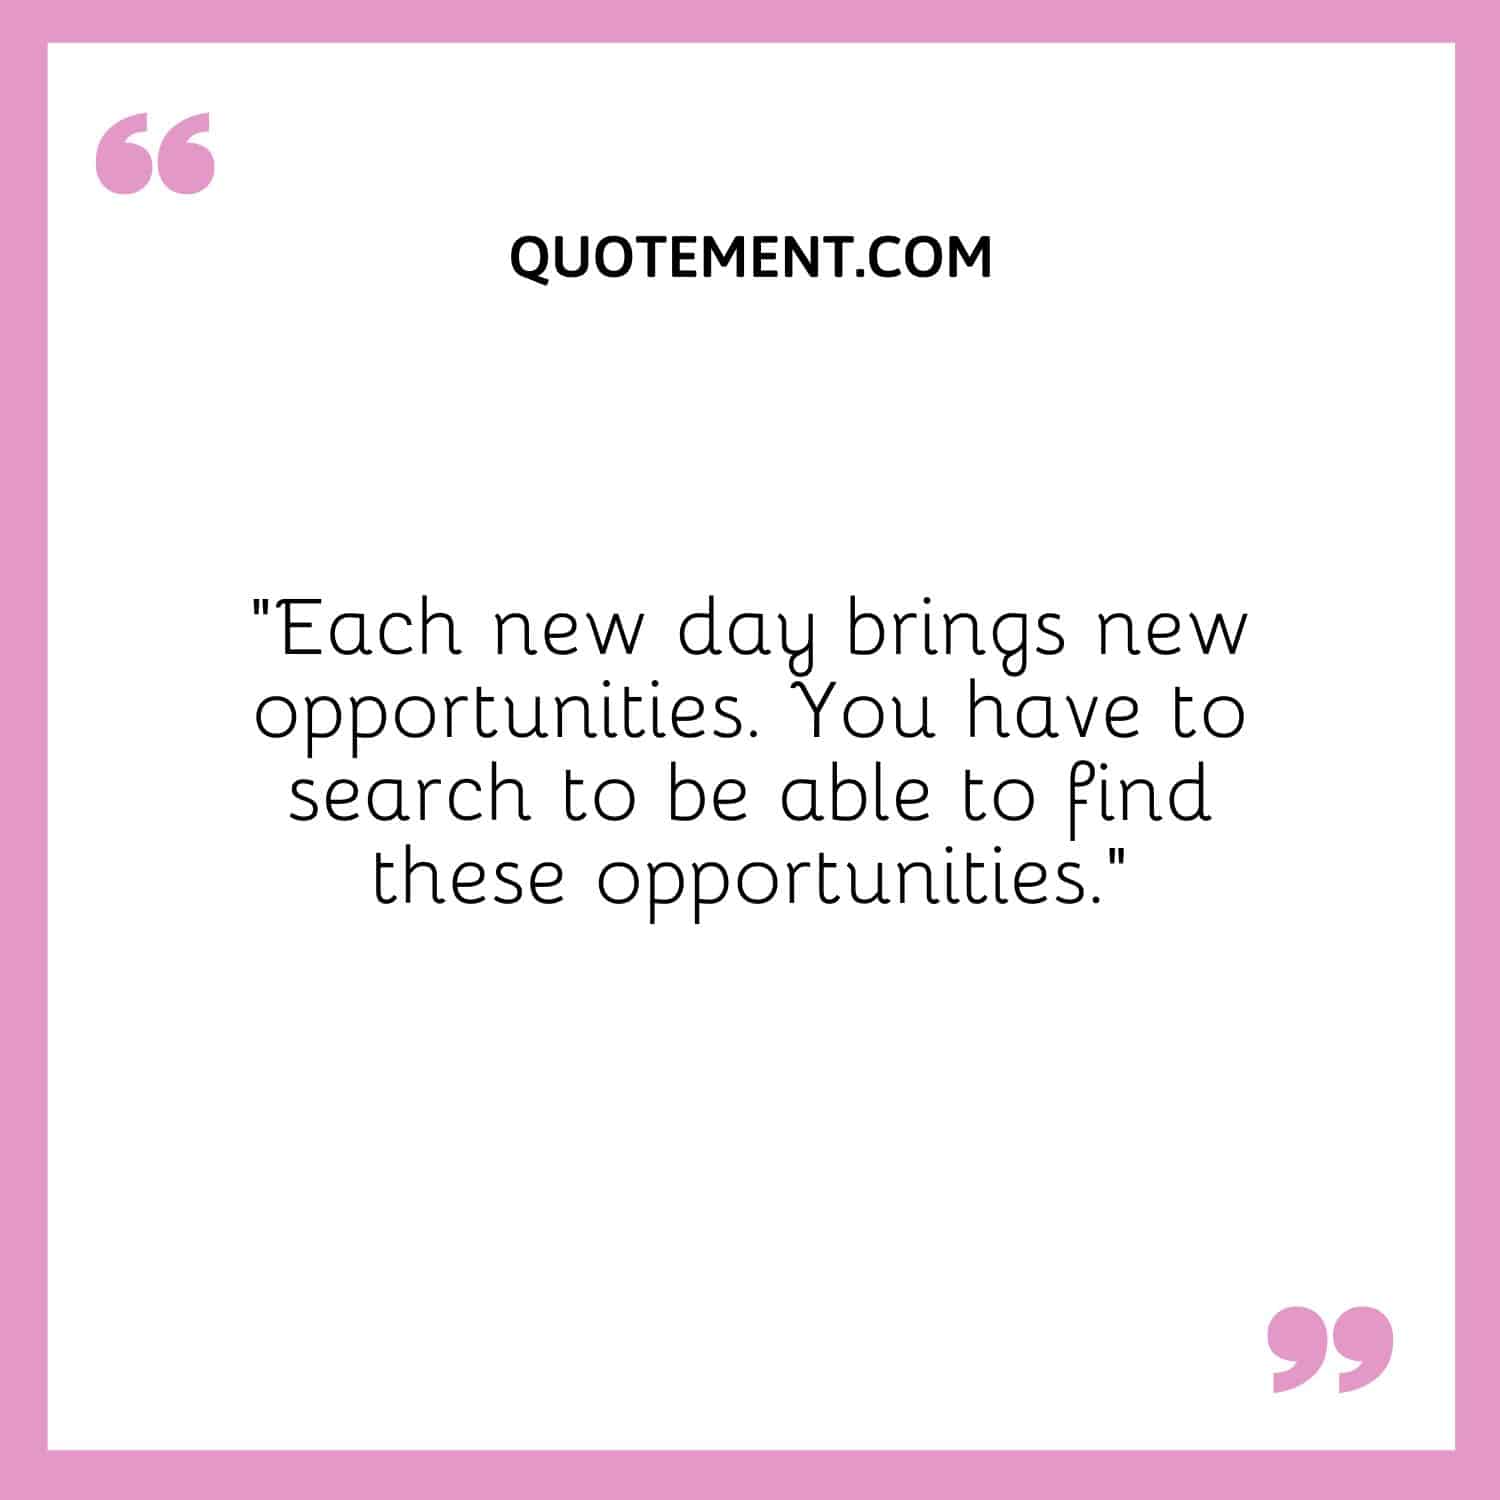 Each new day brings new opportunities